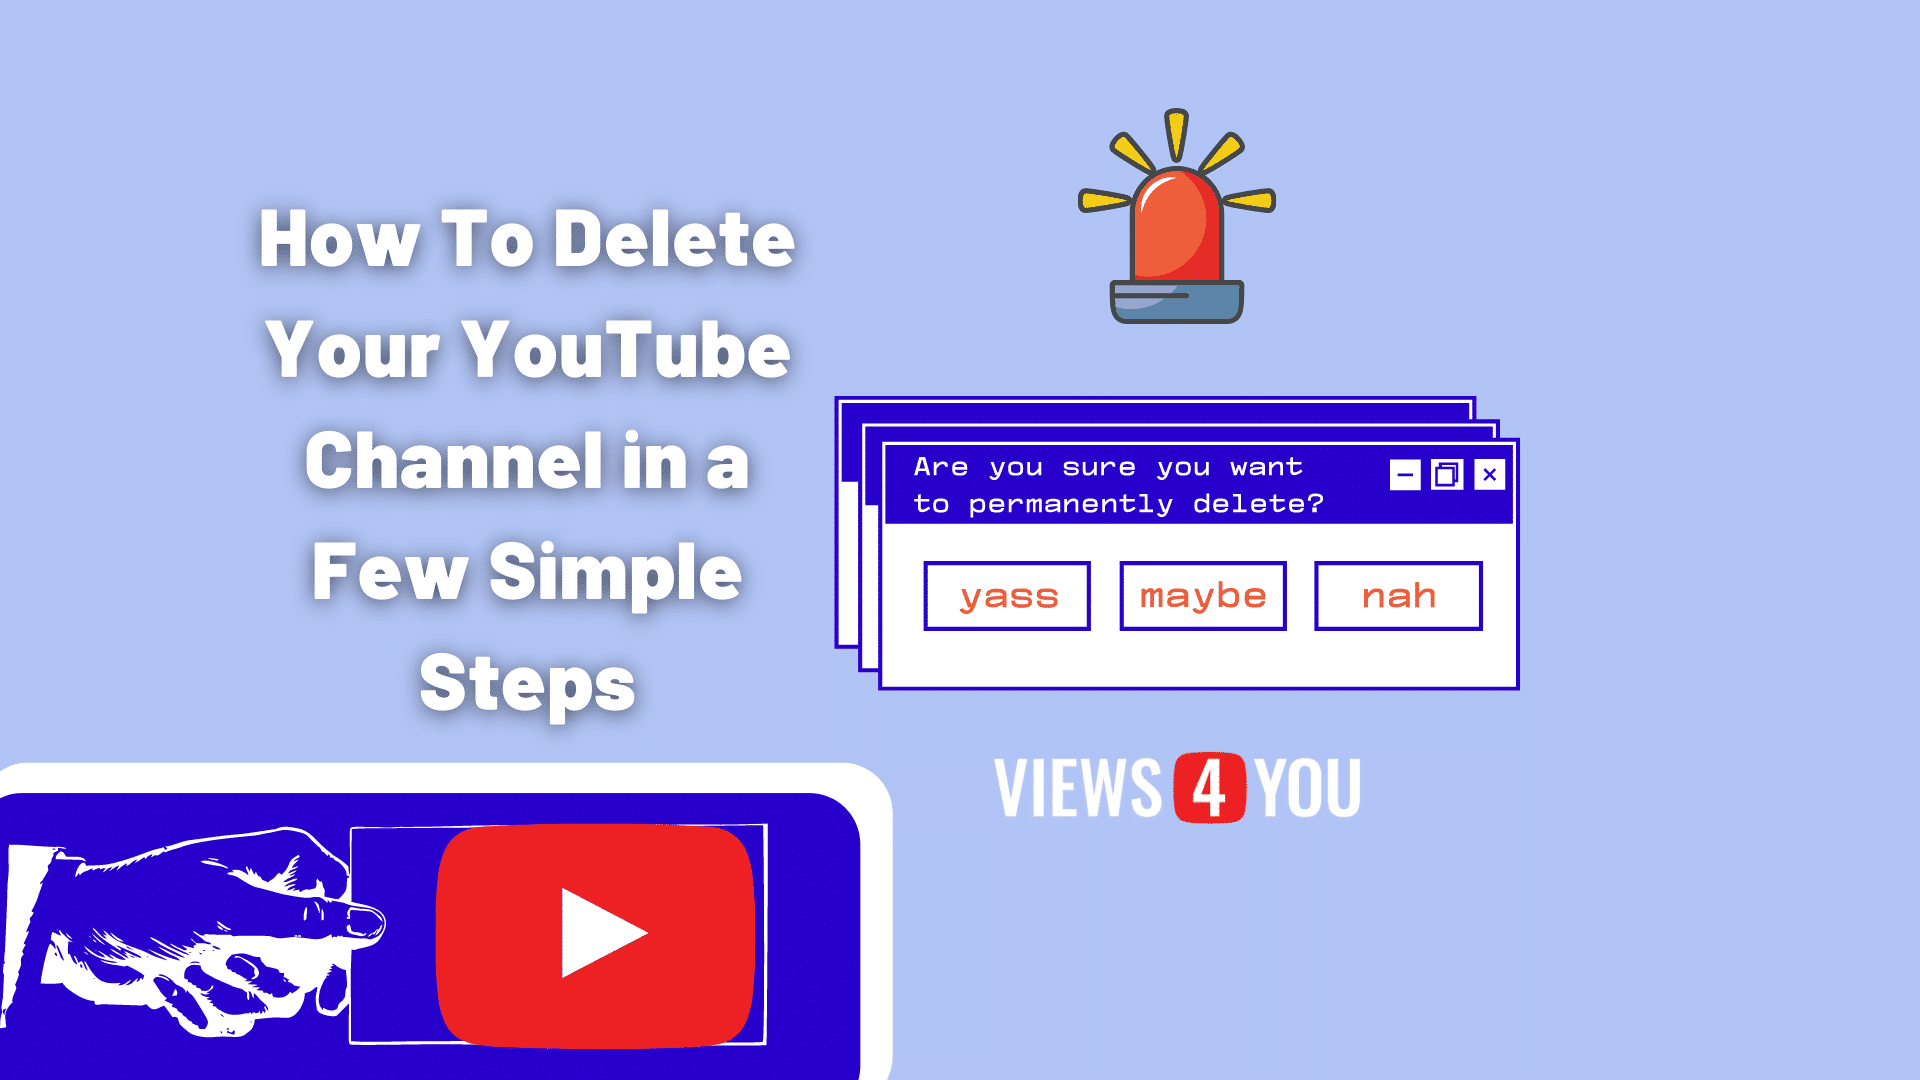 How To Delete Your YouTube Channel in a Few Simple Steps